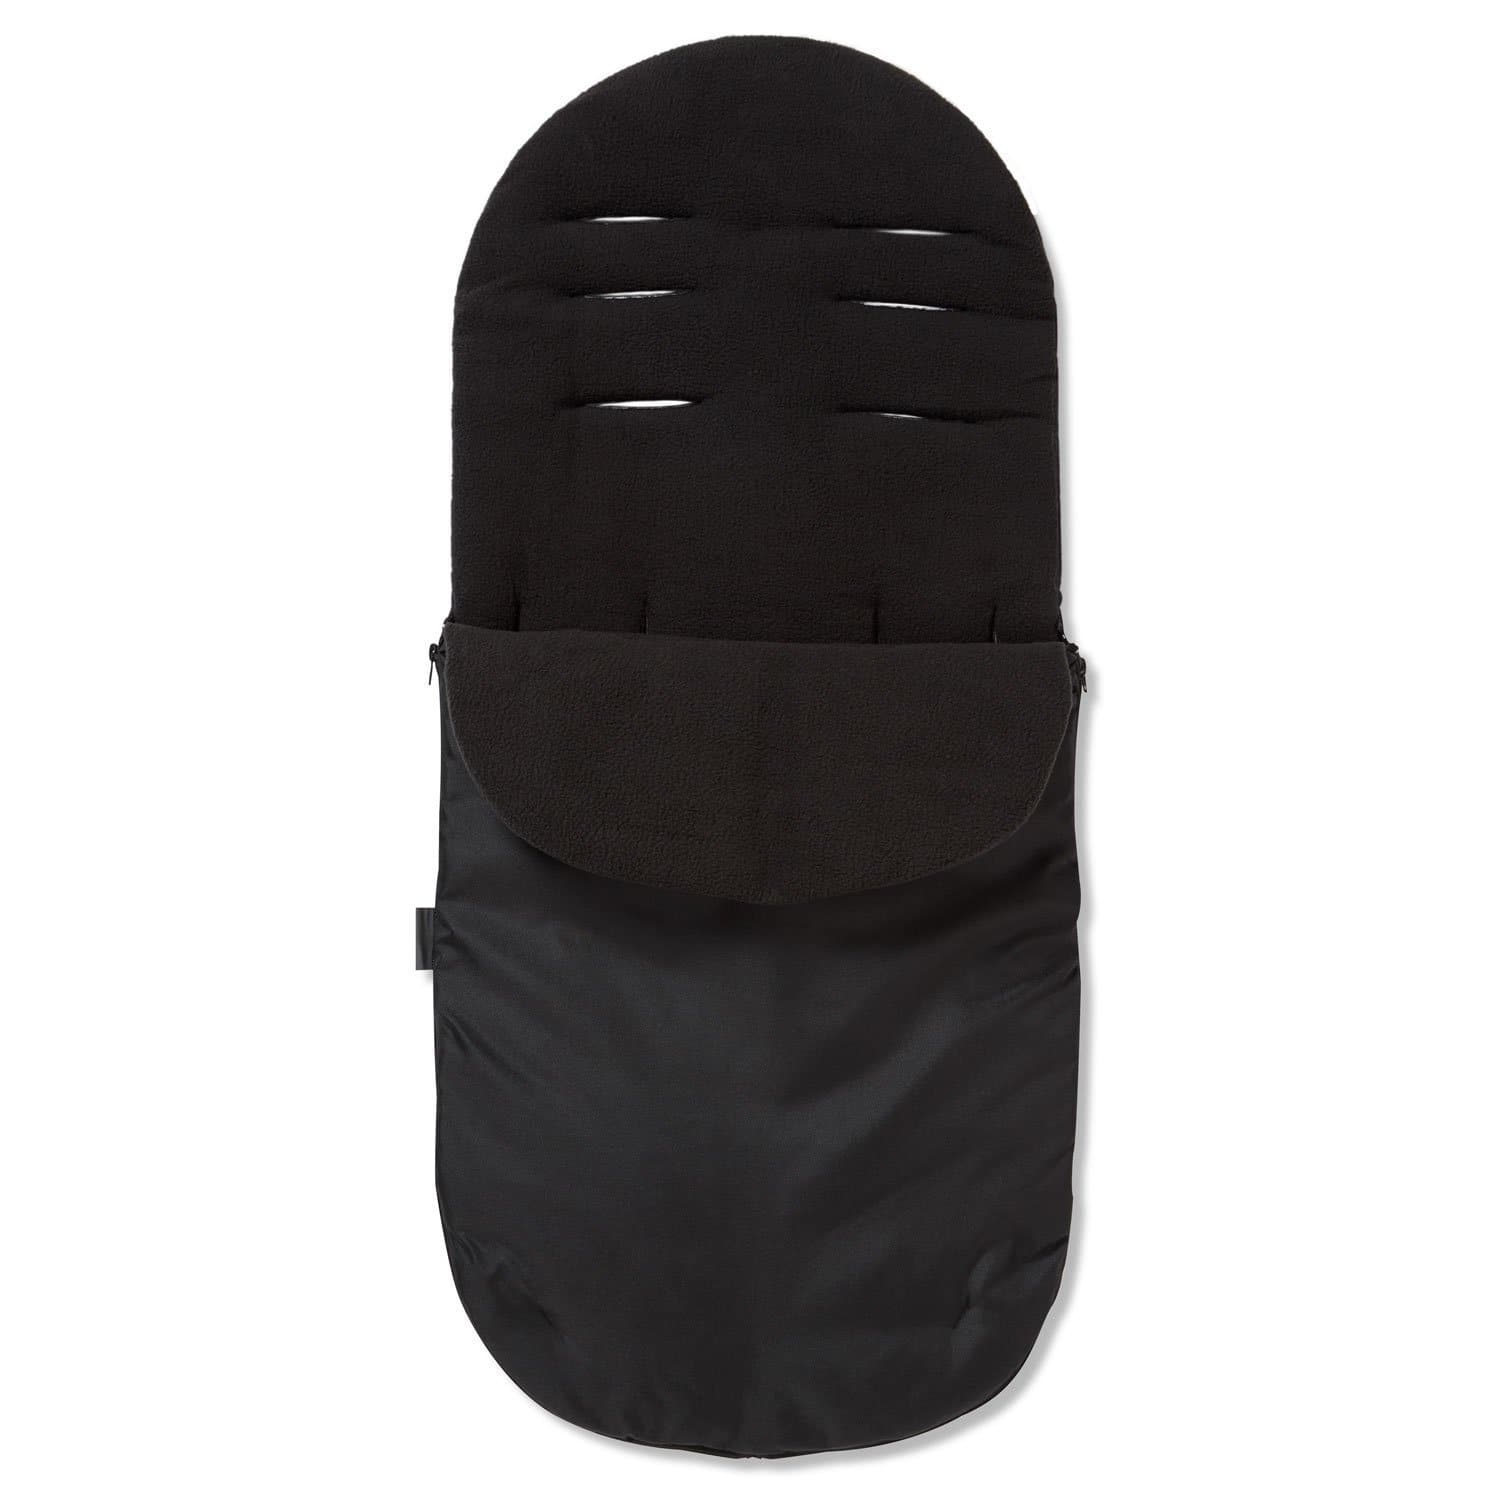 Footmuff / Cosy Toes Compatible with XTS - Black / Fits All Models | For Your Little One